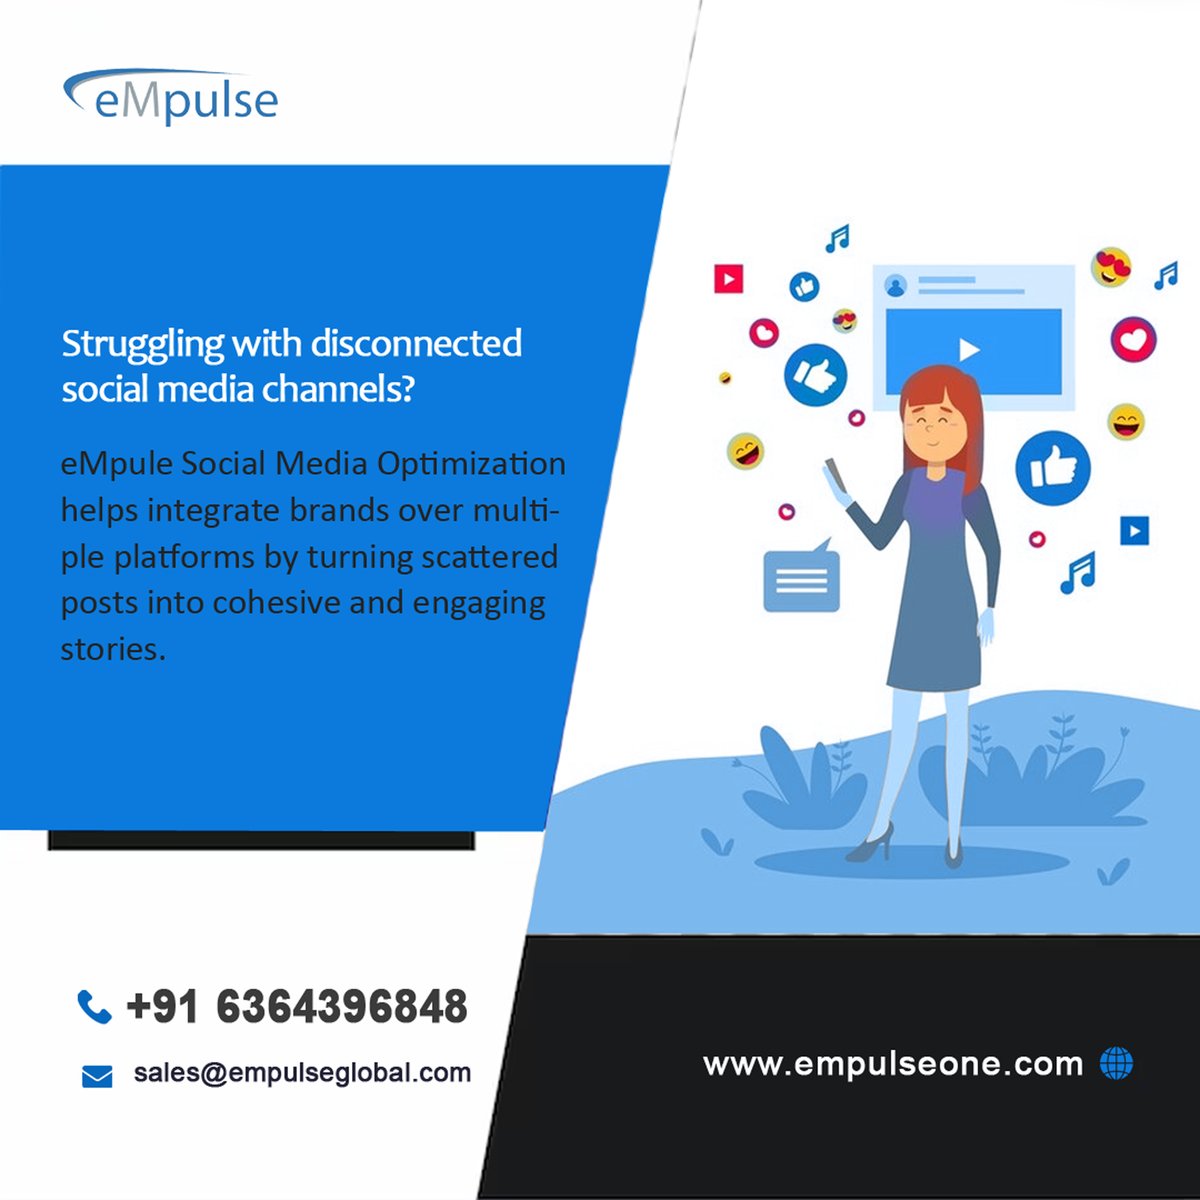 Struggling with disconnected social media channels? eMpule SMO helps integrate brands over multiple platforms by turning scattered posts into cohesive and engaging stories. Site: empulseglobal.com #empulseglobal #socialmediaoptimization #BrandVisibility #postengagement